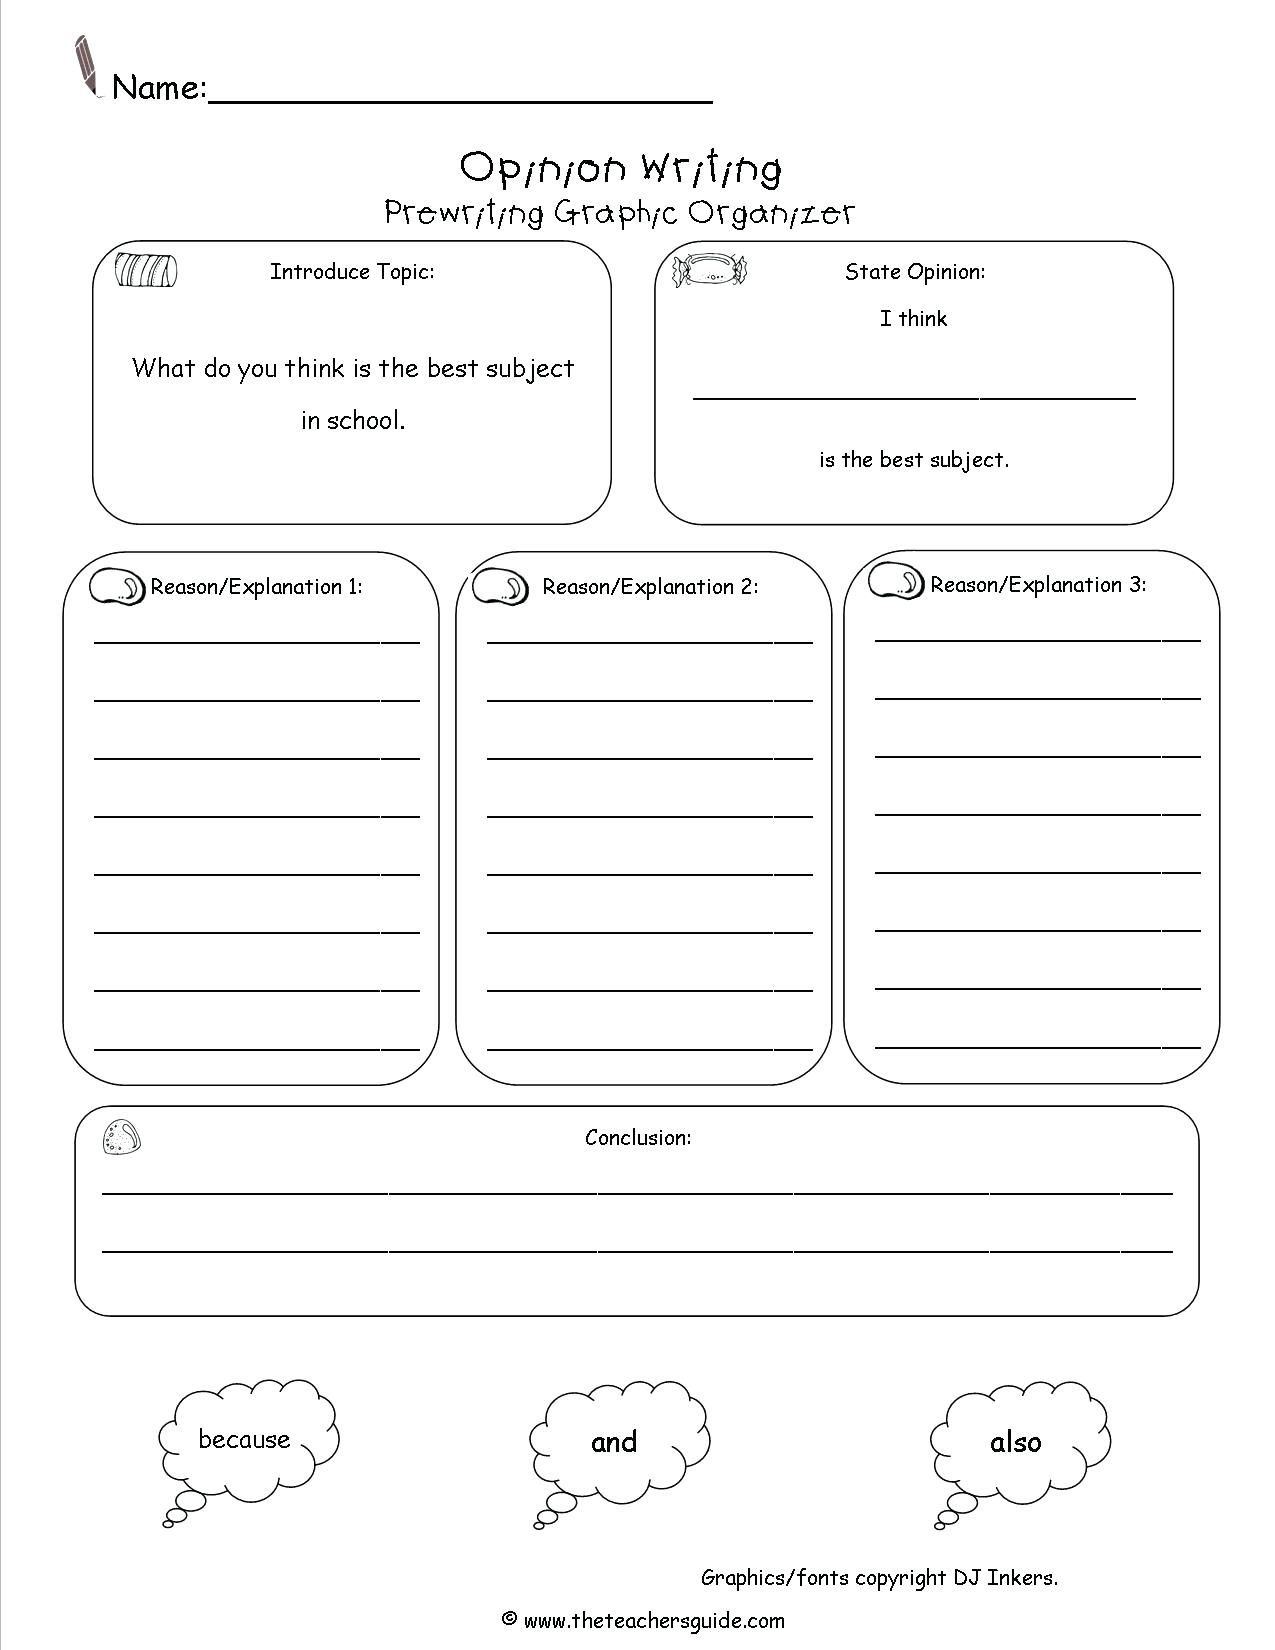 Free Printable Graphic Organizers (90+ Images In Collection) Page 1 - Free Printable Graphic Organizers